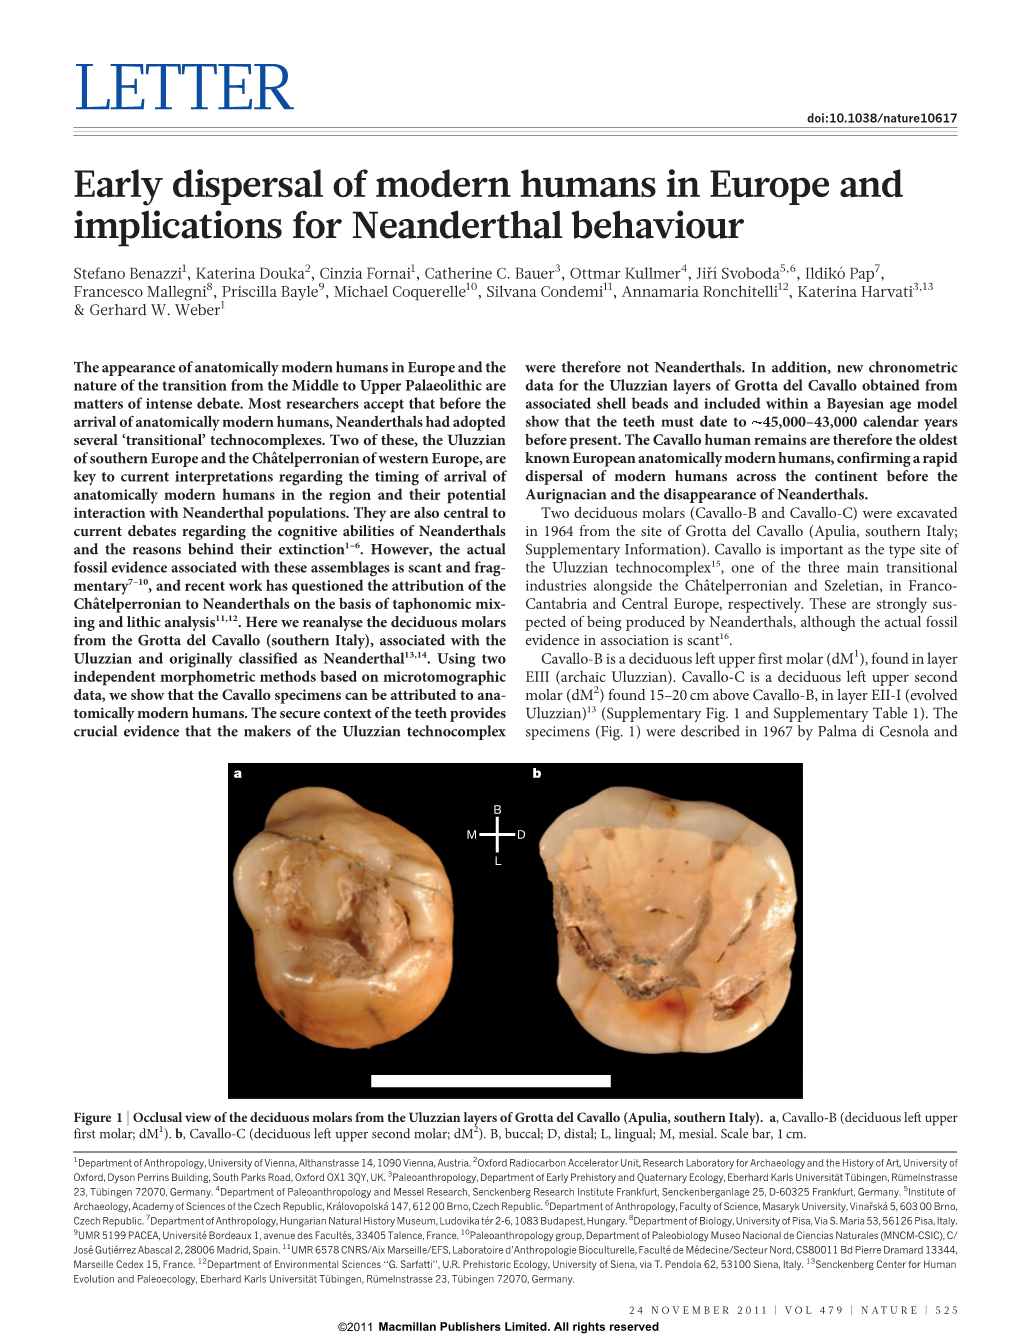 Early Dispersal of Modern Humans in Europe and Implications for Neanderthal Behaviour